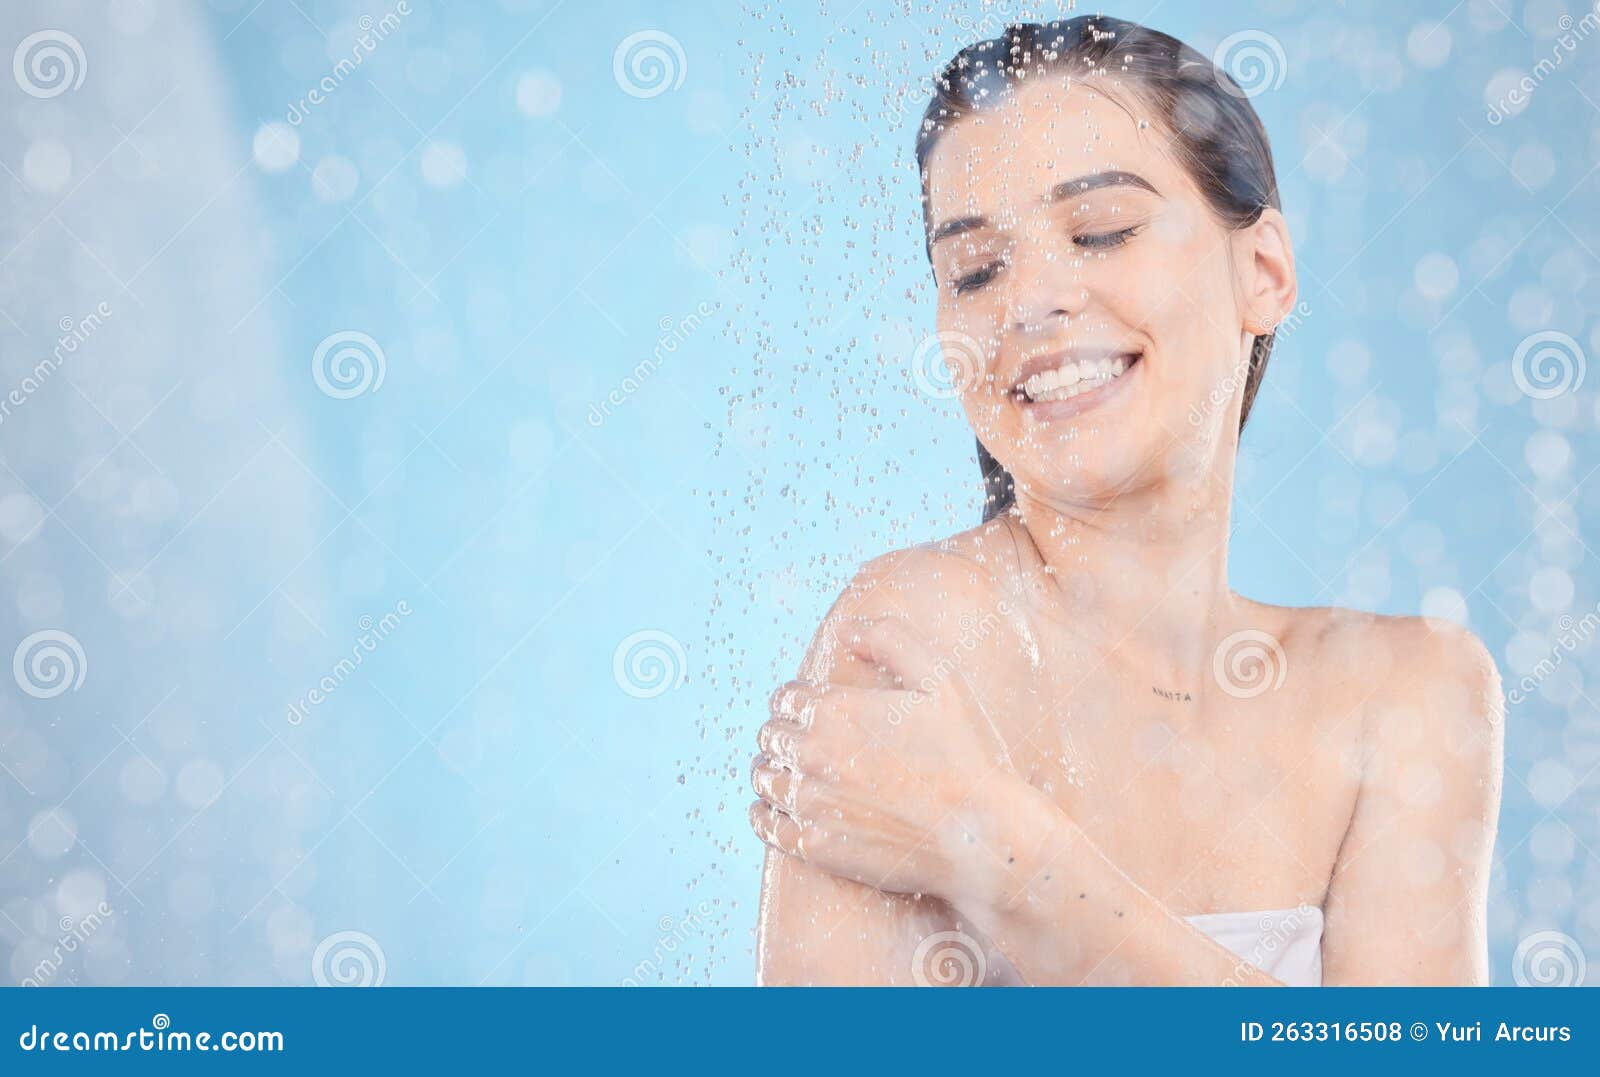 Beauty Skincare And Water Drops In Shower With A Woman Washing With Soap Cosmetics Or